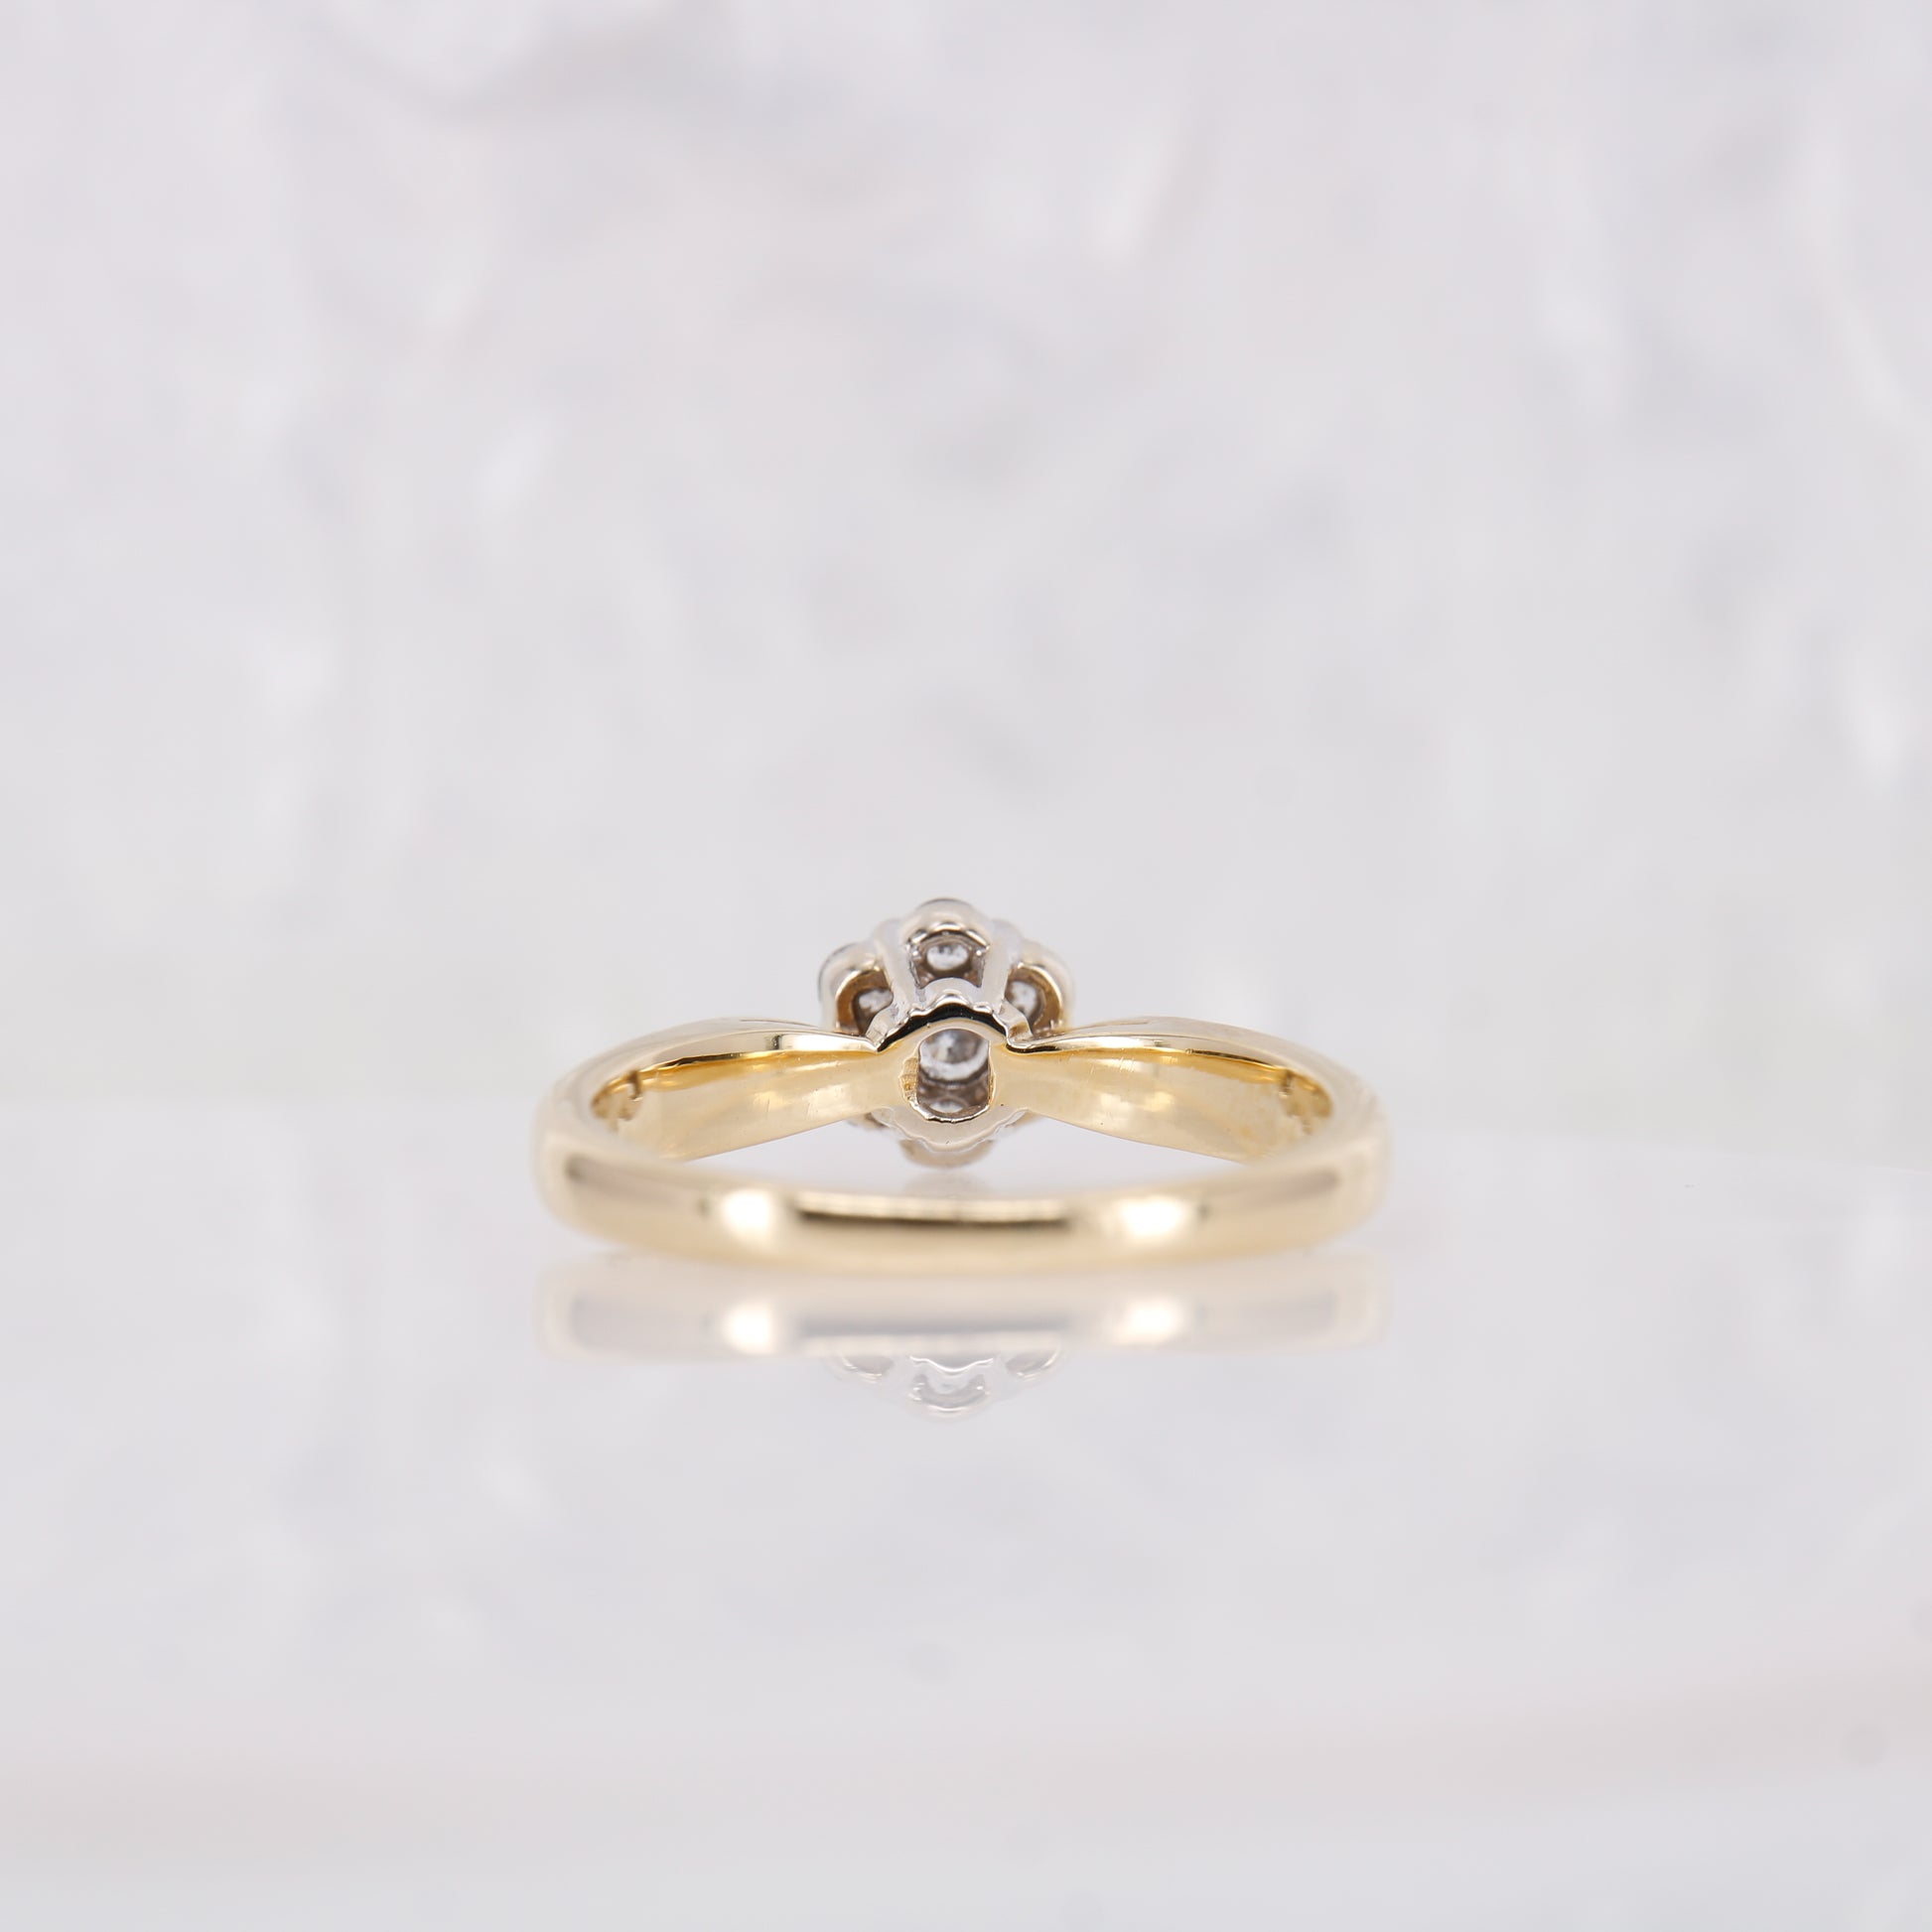 Vintage Secondhand Diasy Diamond Ring. Preowned diamond flower ring in 18ct yellow gold.